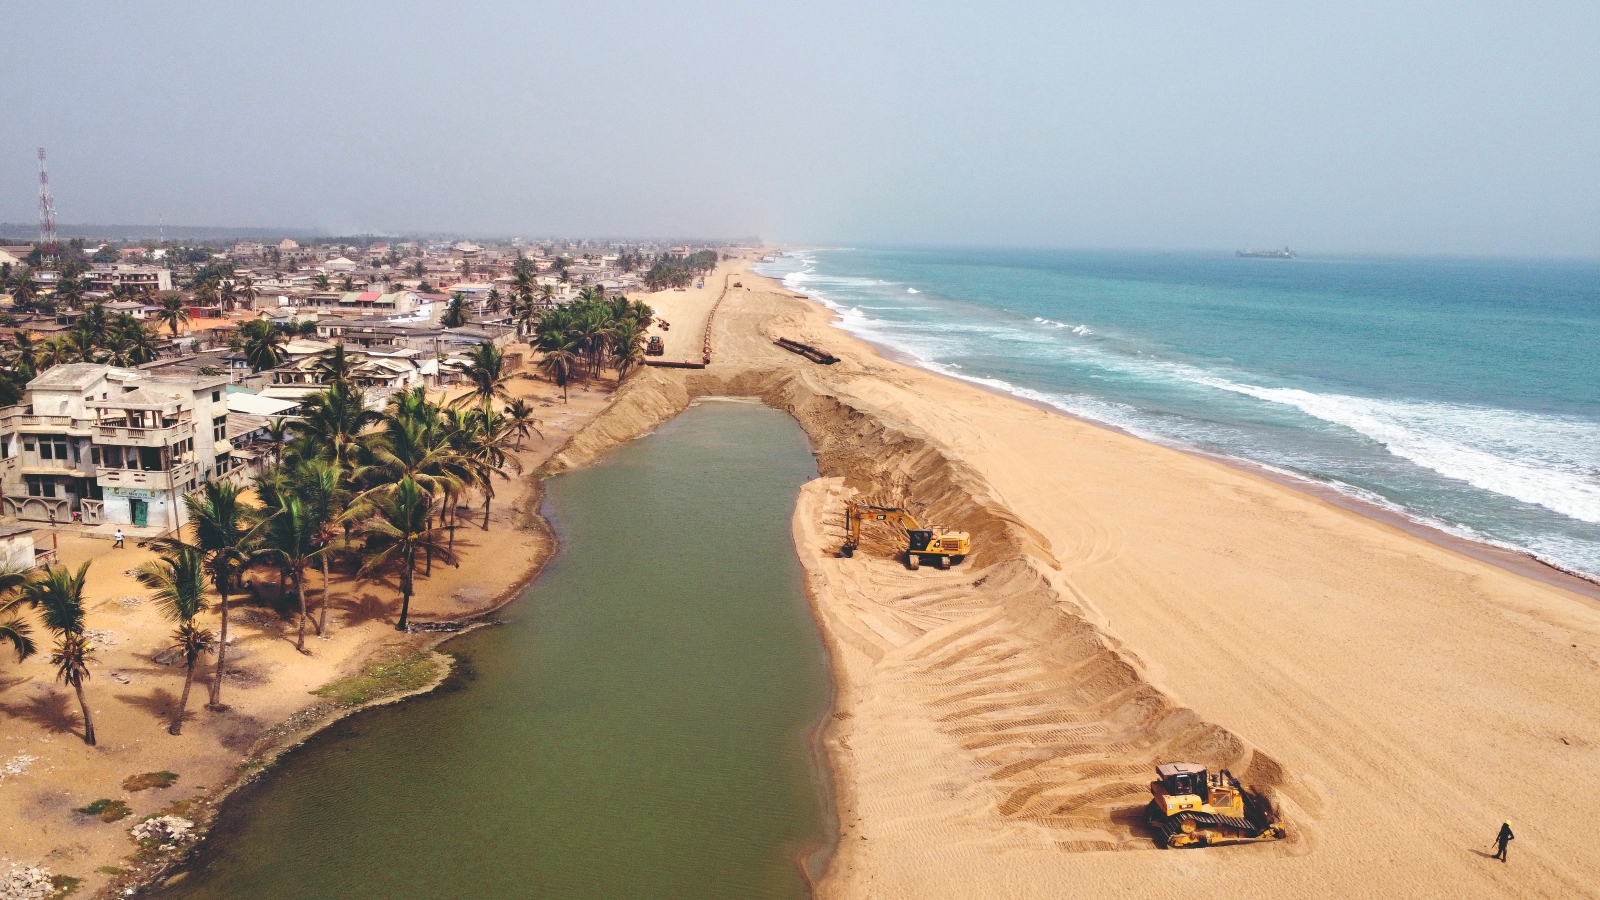 Construction crews move sand to build a sand motor on the coast of Benin, in West Africa. The country is facing rapid erosion as a result of sea level rise.